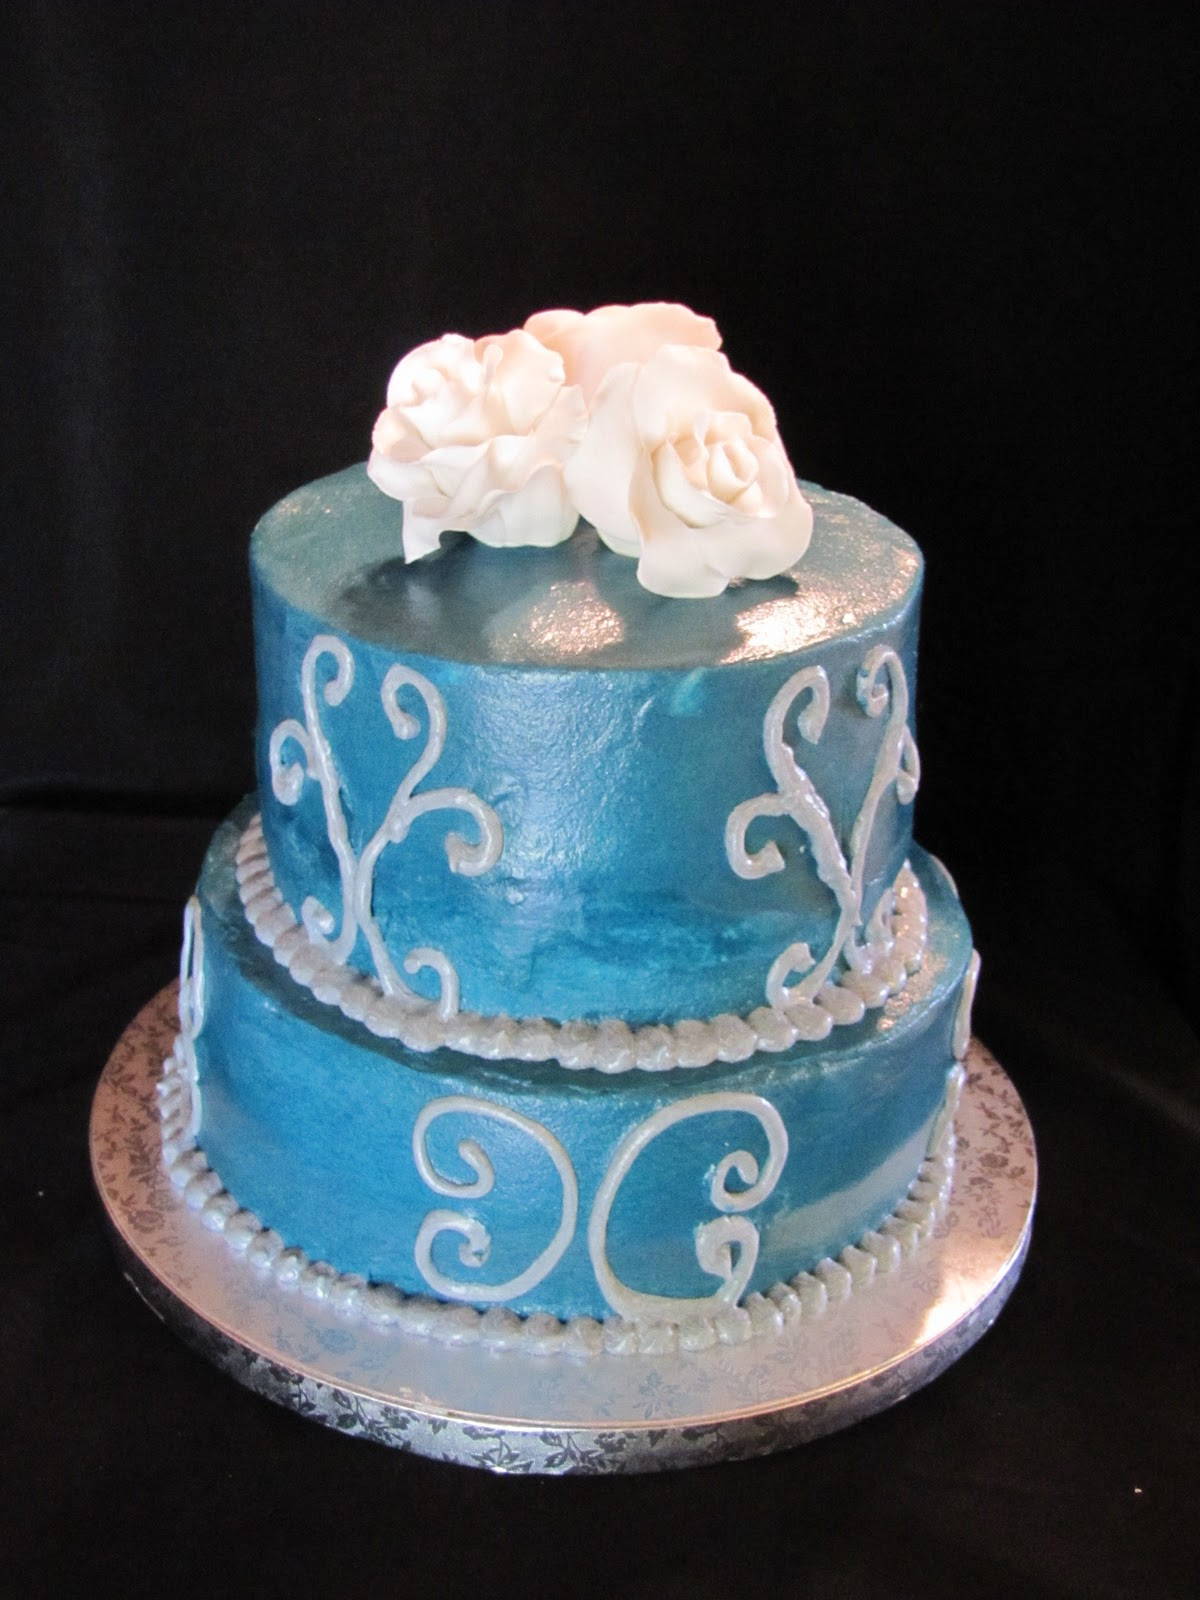 Teal And Silver Wedding Cakes
 Leilani s Heavenly Cakes Teal & Silver Wedding Cake